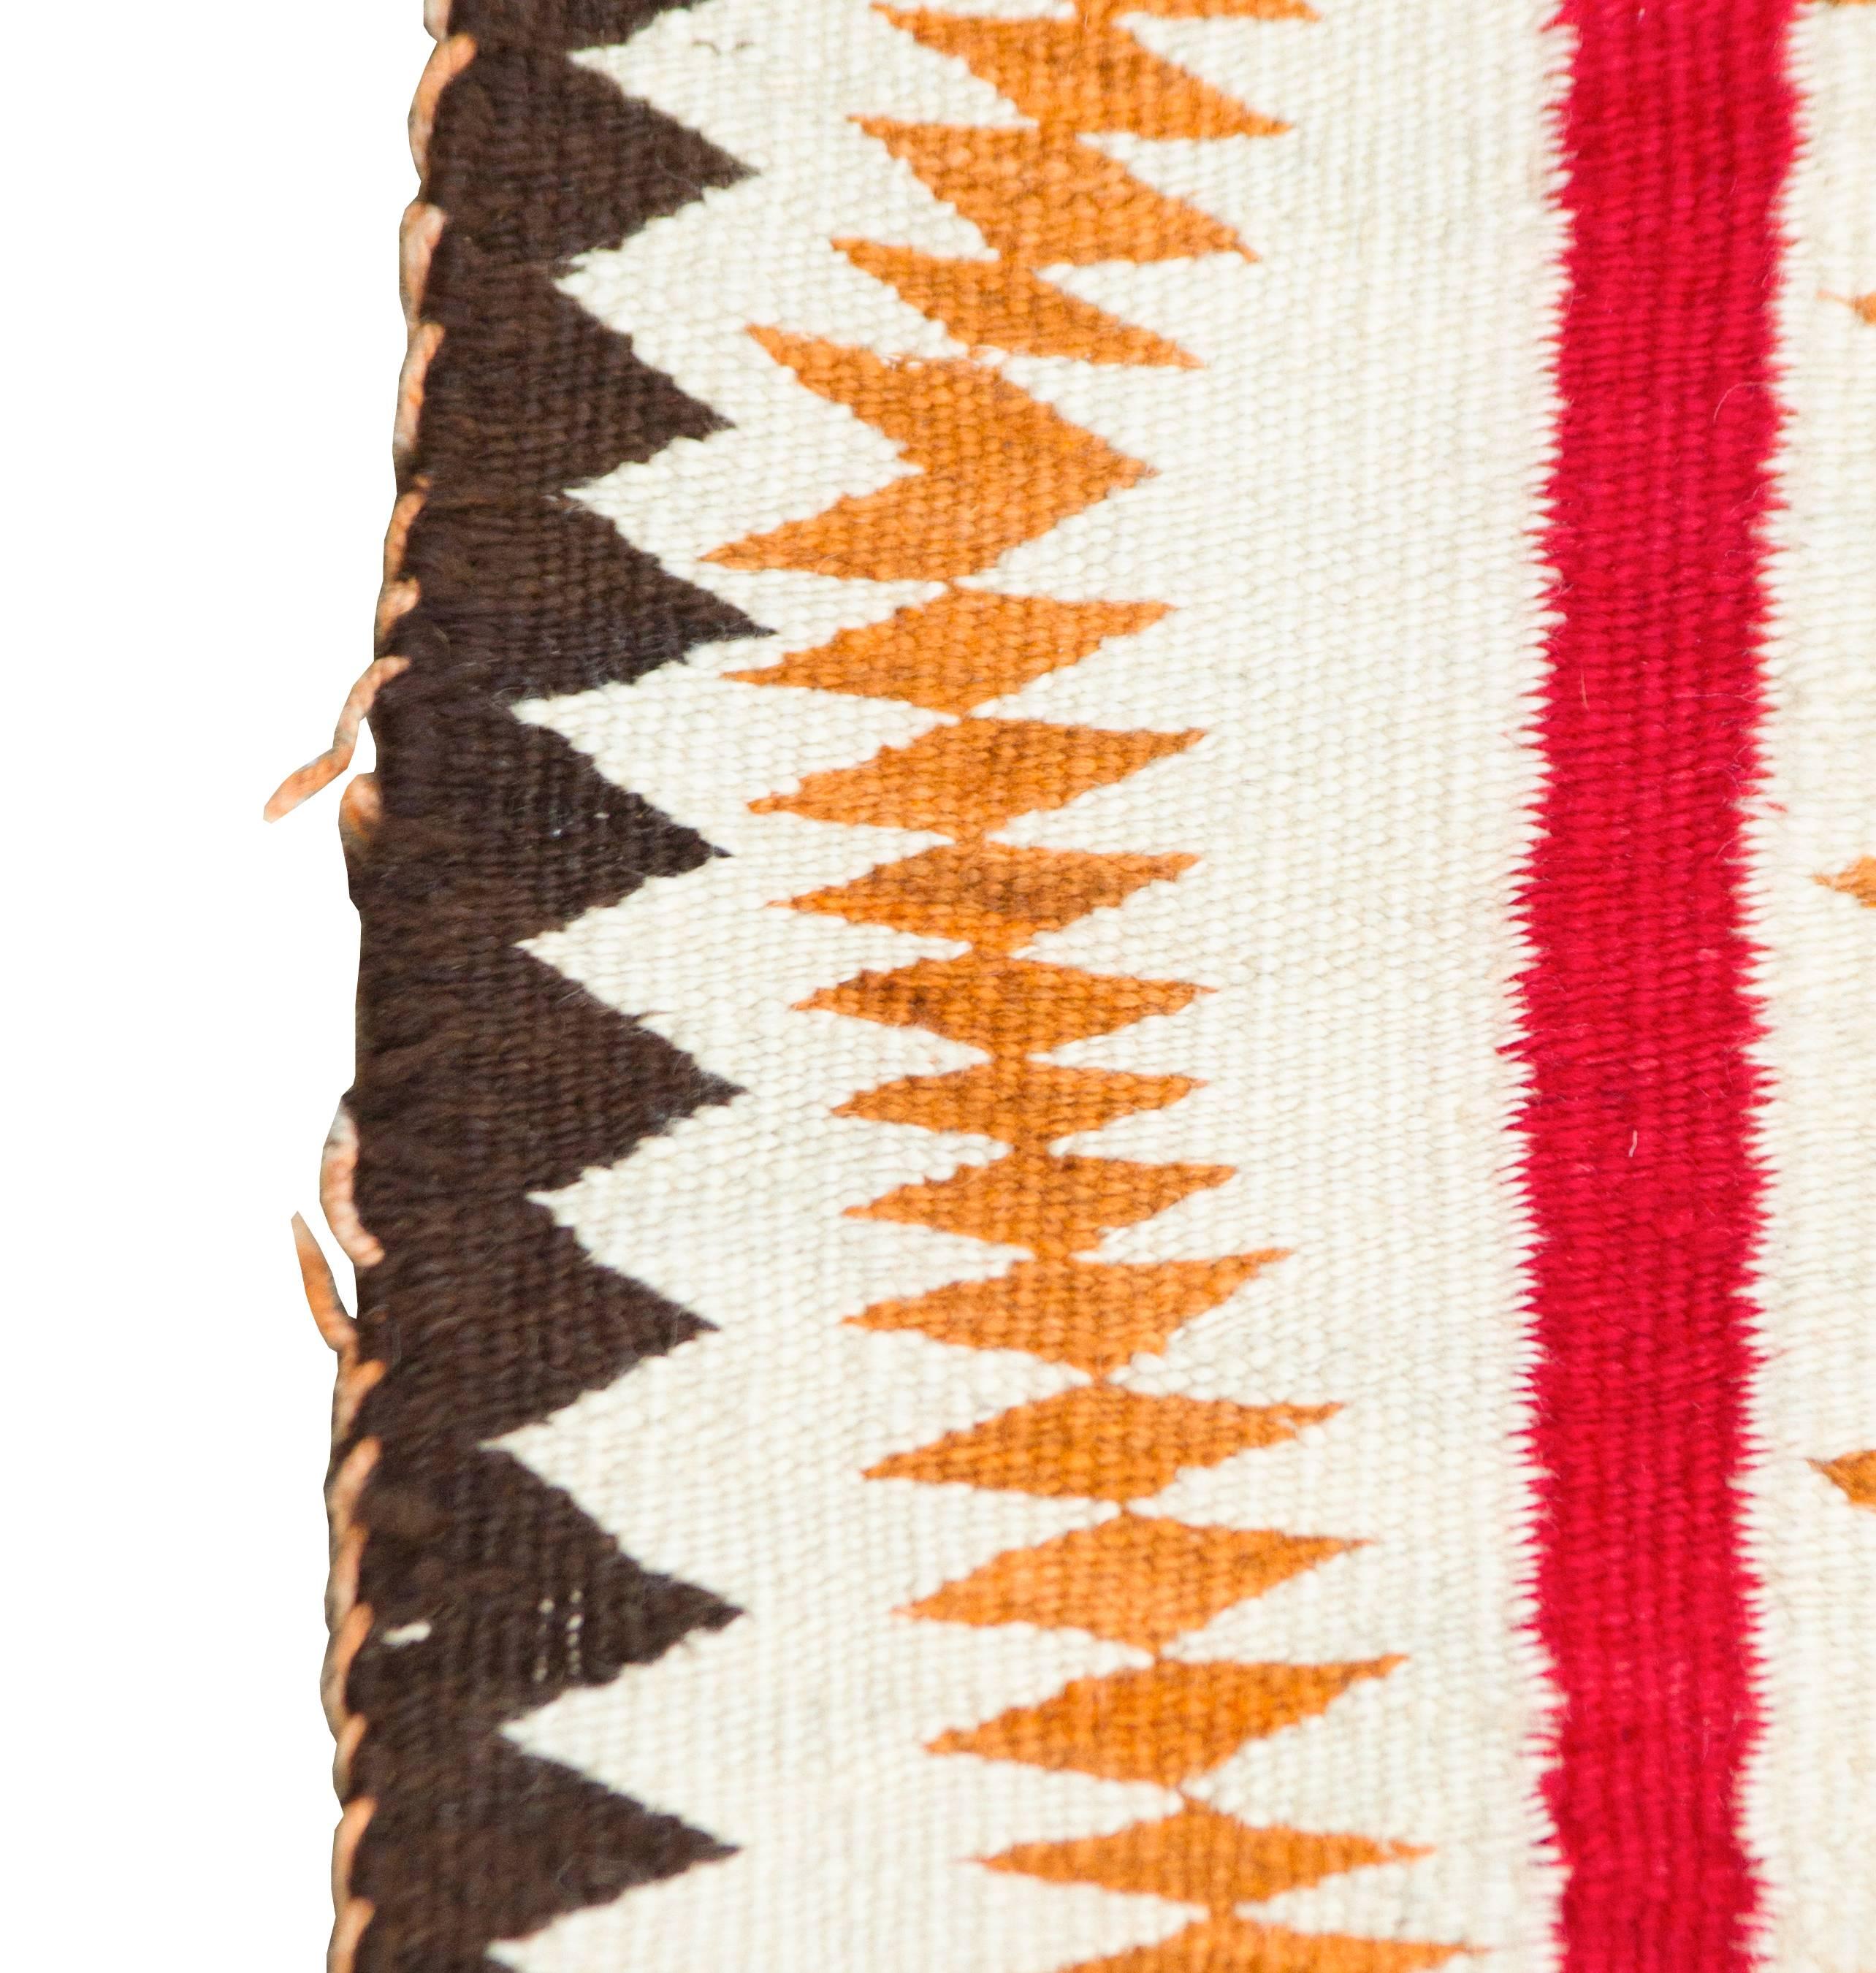 This is an unusual rug, having different design elements unified by color and positive and negative space.